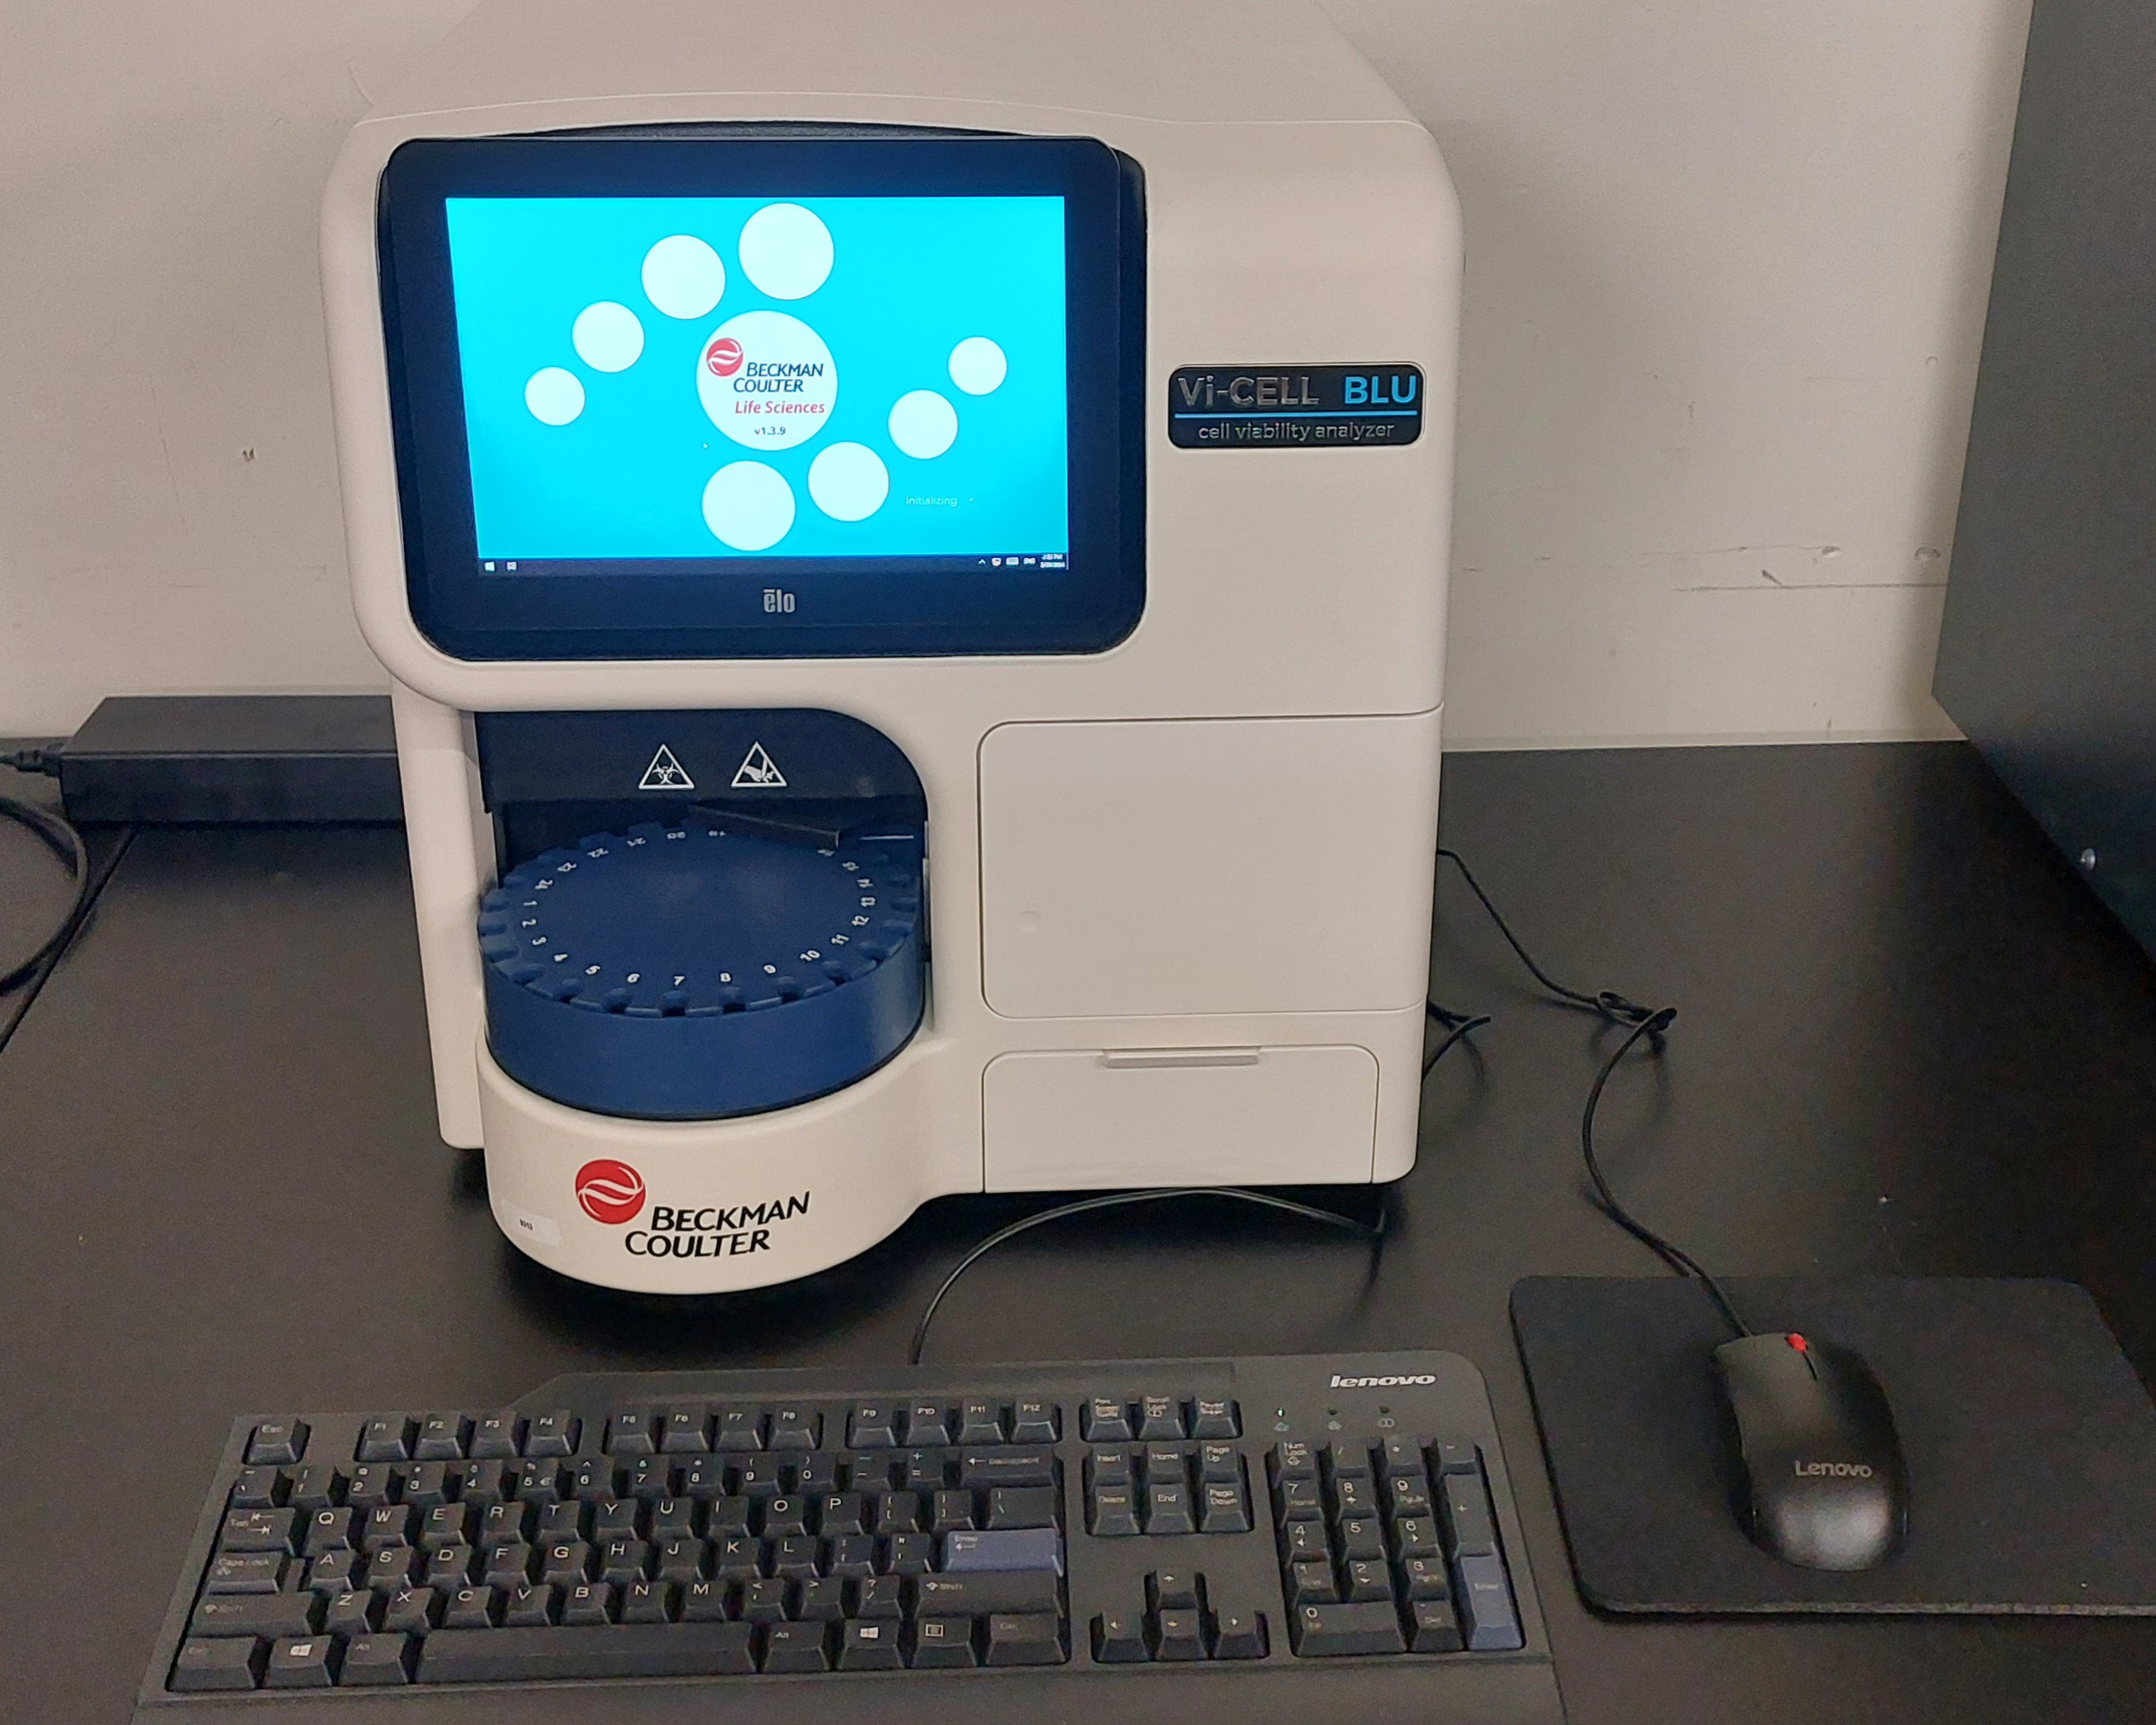 Beckman Vi-Cell Blu Cell Counter (2021 Model)